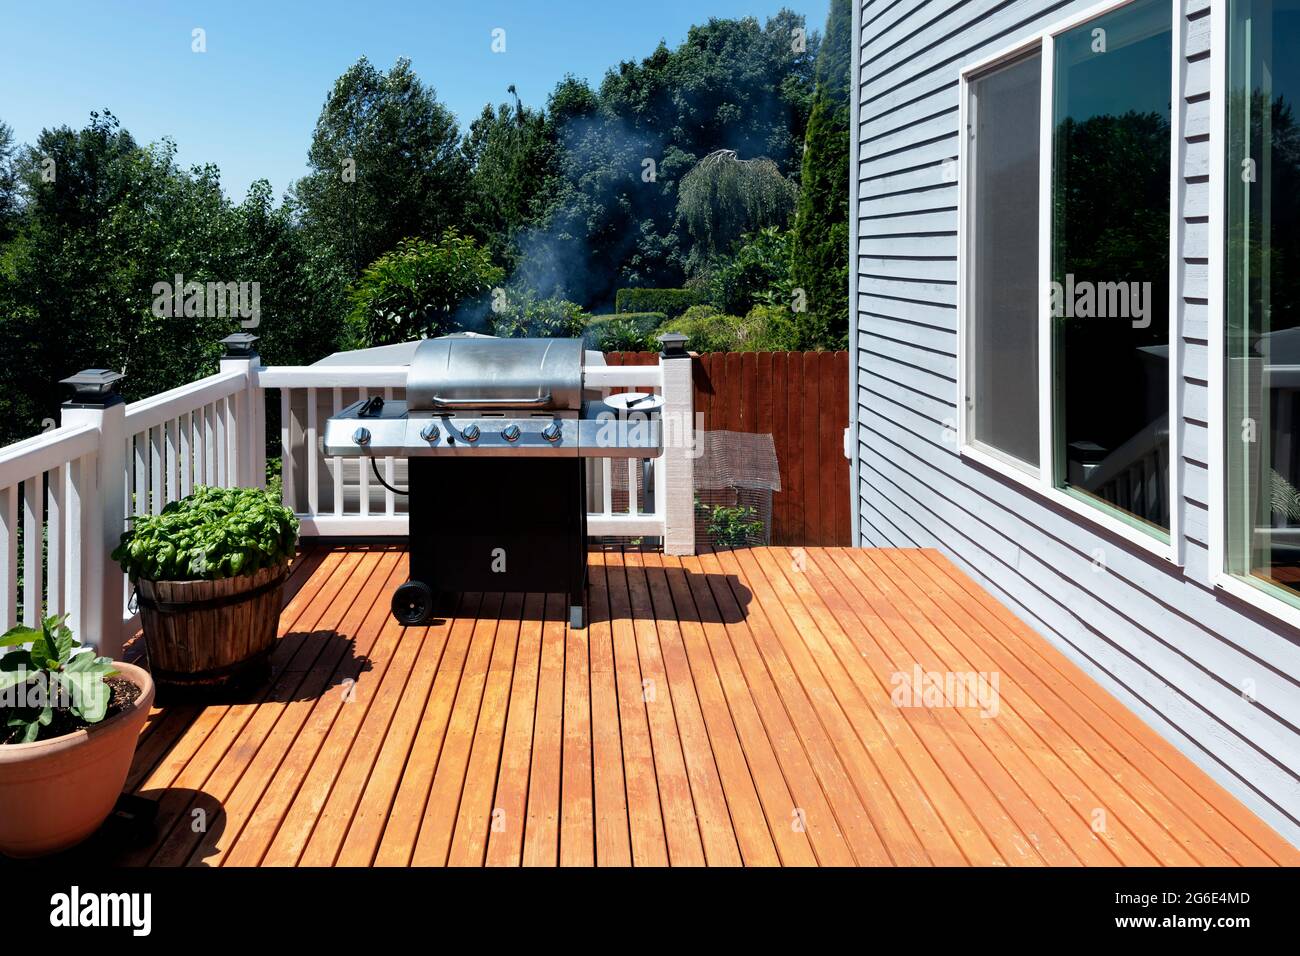 Large outdoor BBQ cooker with smoke coming out while on home wooden deck during summertime Stock Photo